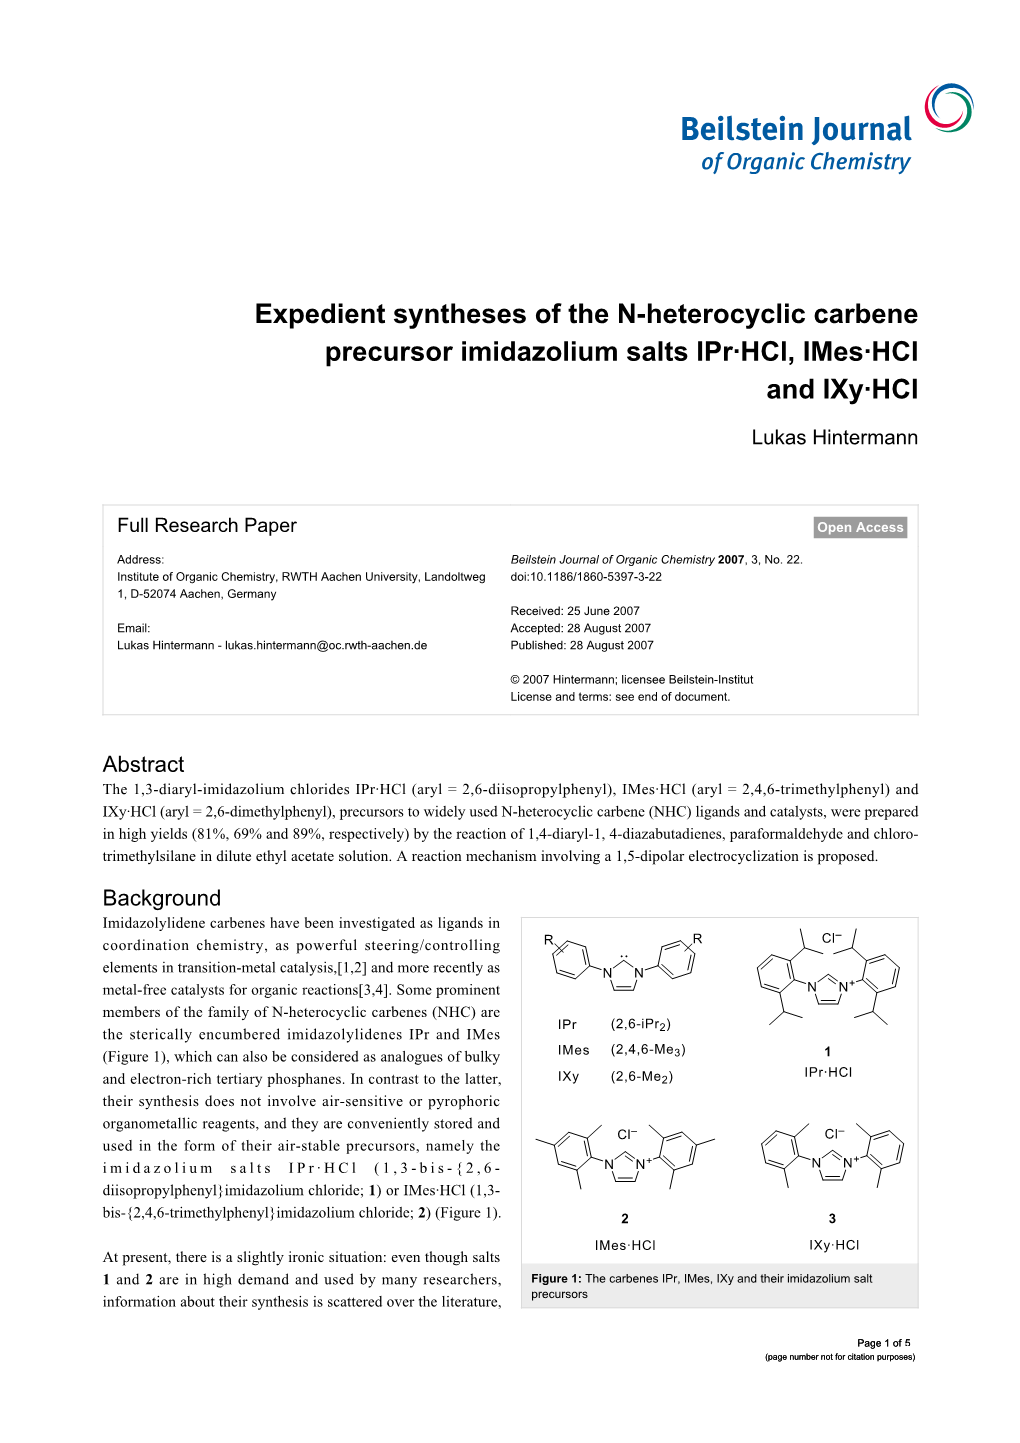 Expedient Syntheses of the N-Heterocyclic Carbene Precursor Imidazolium Salts Ipr·Hcl, Imes·Hcl and Ixy·Hcl